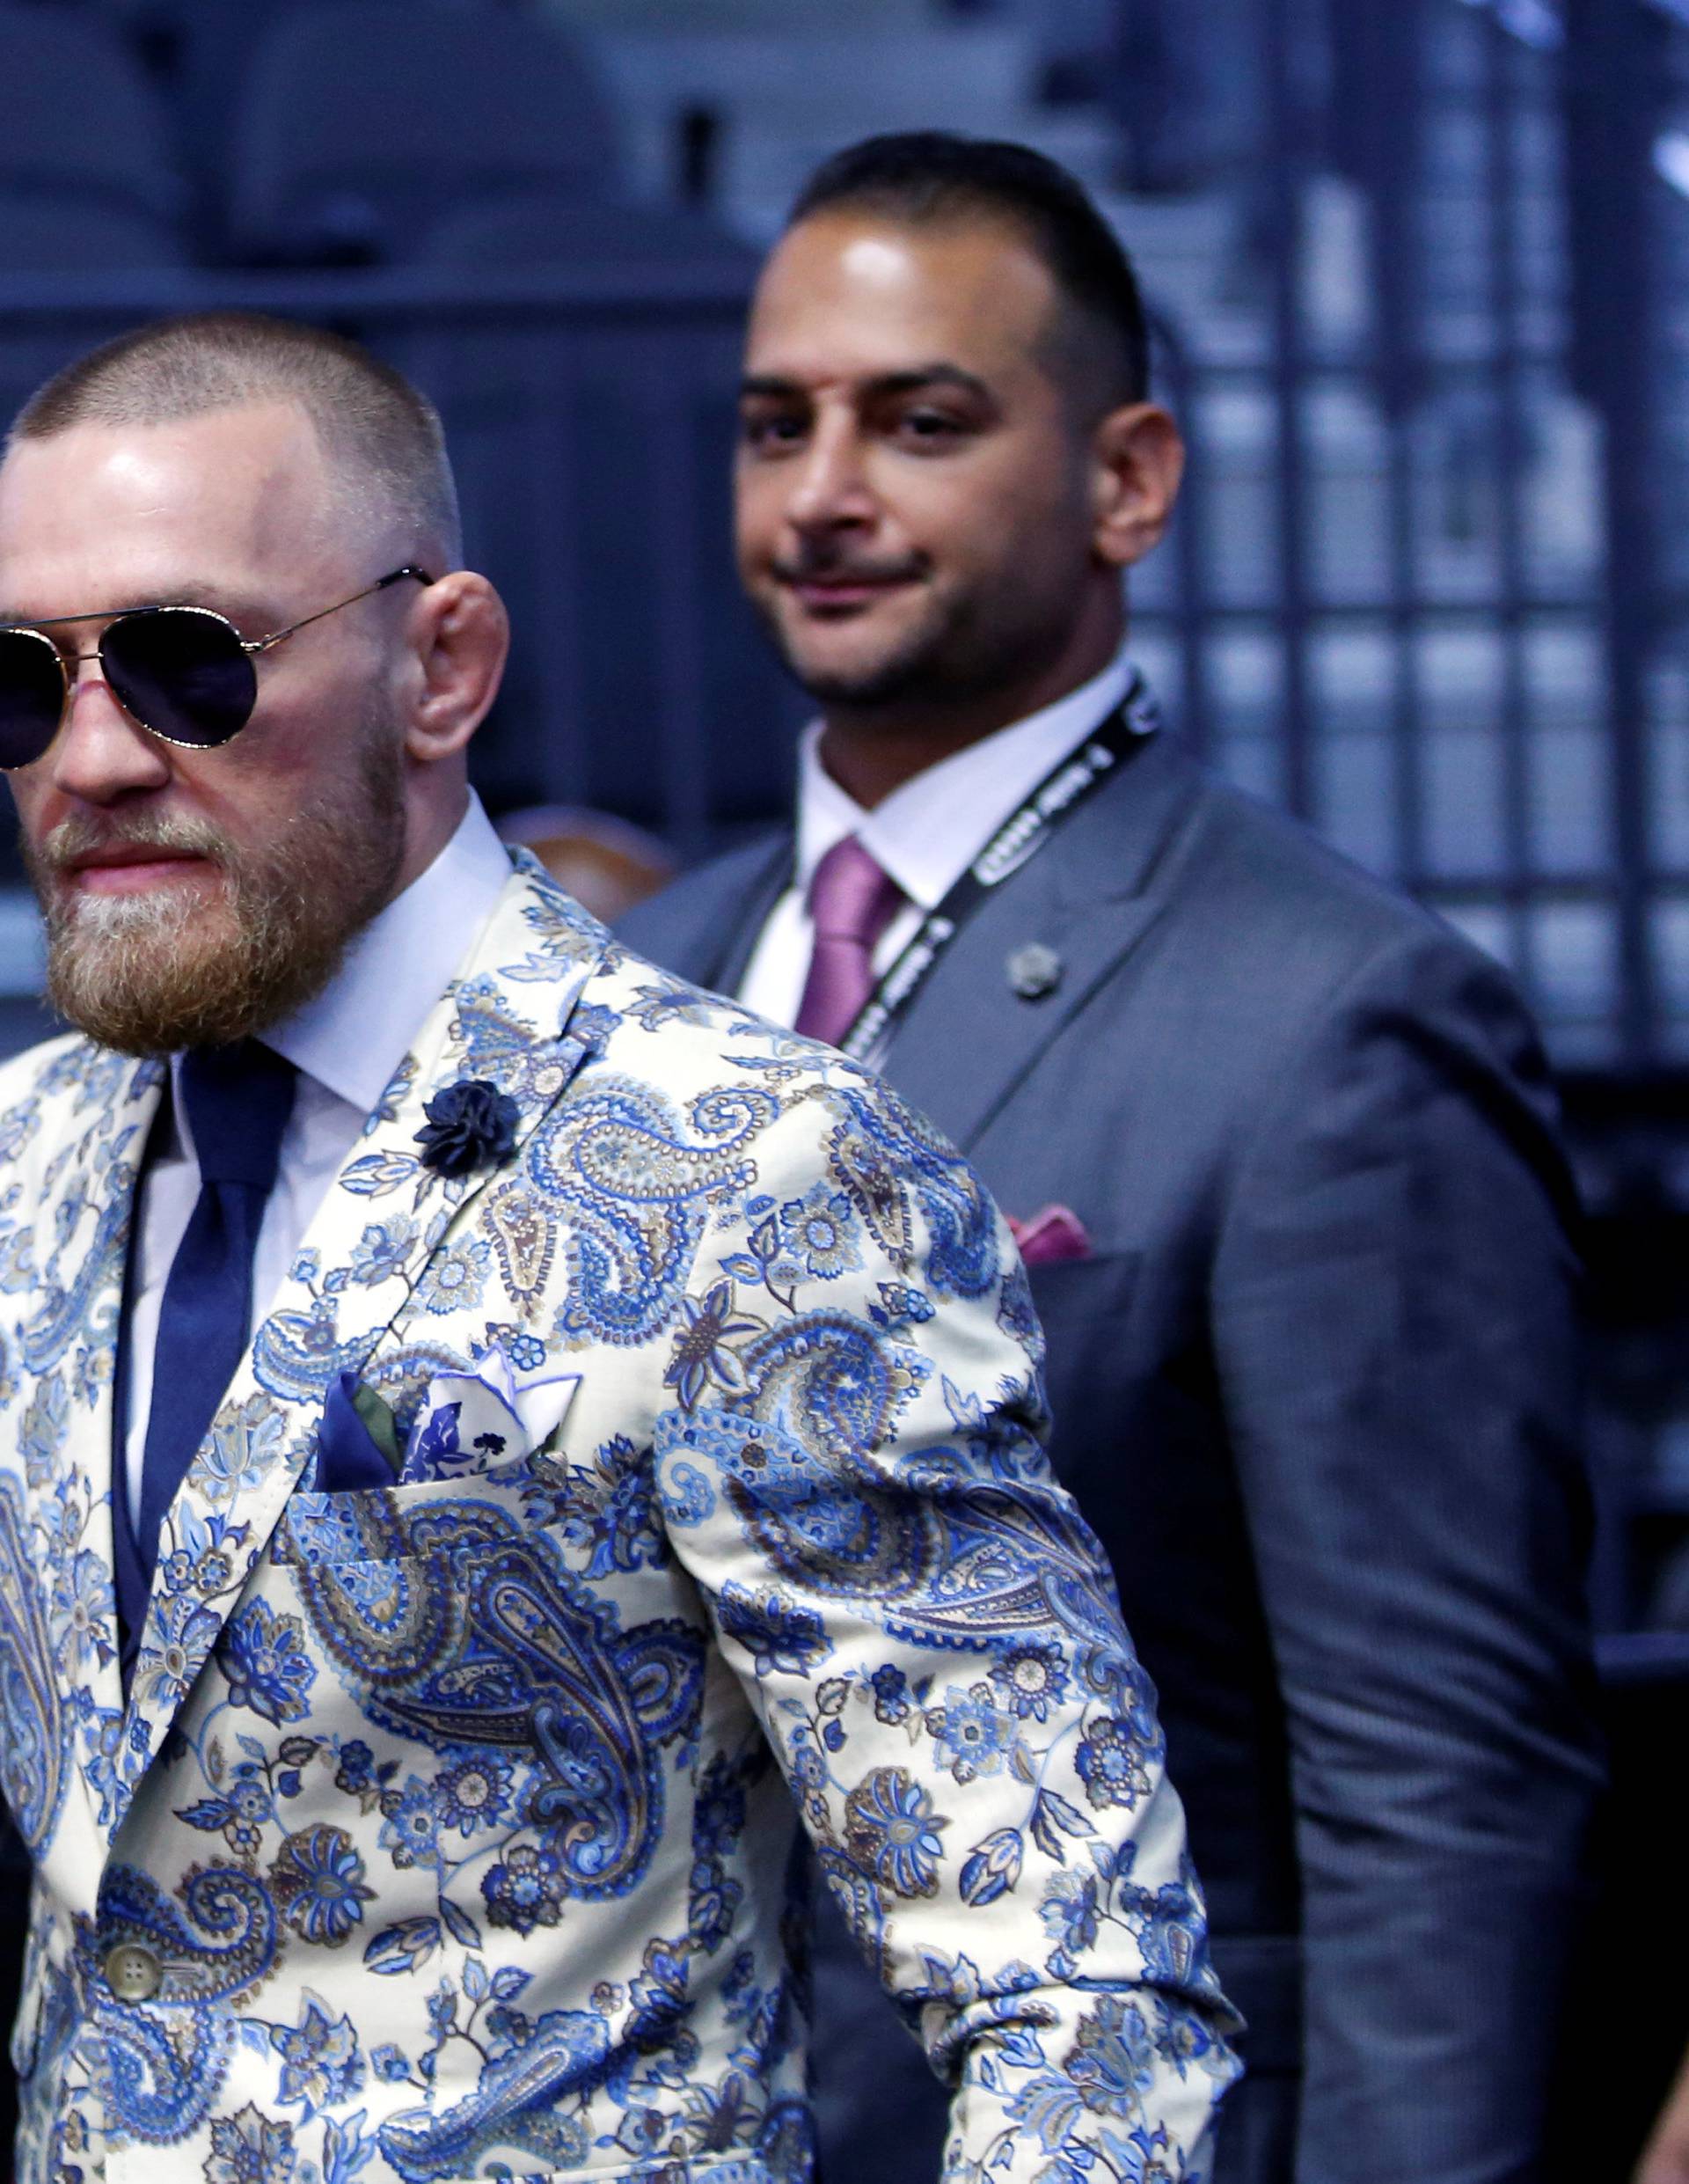 UFC lightweight champion Conor McGregor of Ireland arrives for a post-fight news conference at T-Mobile Arena in Las Vegas